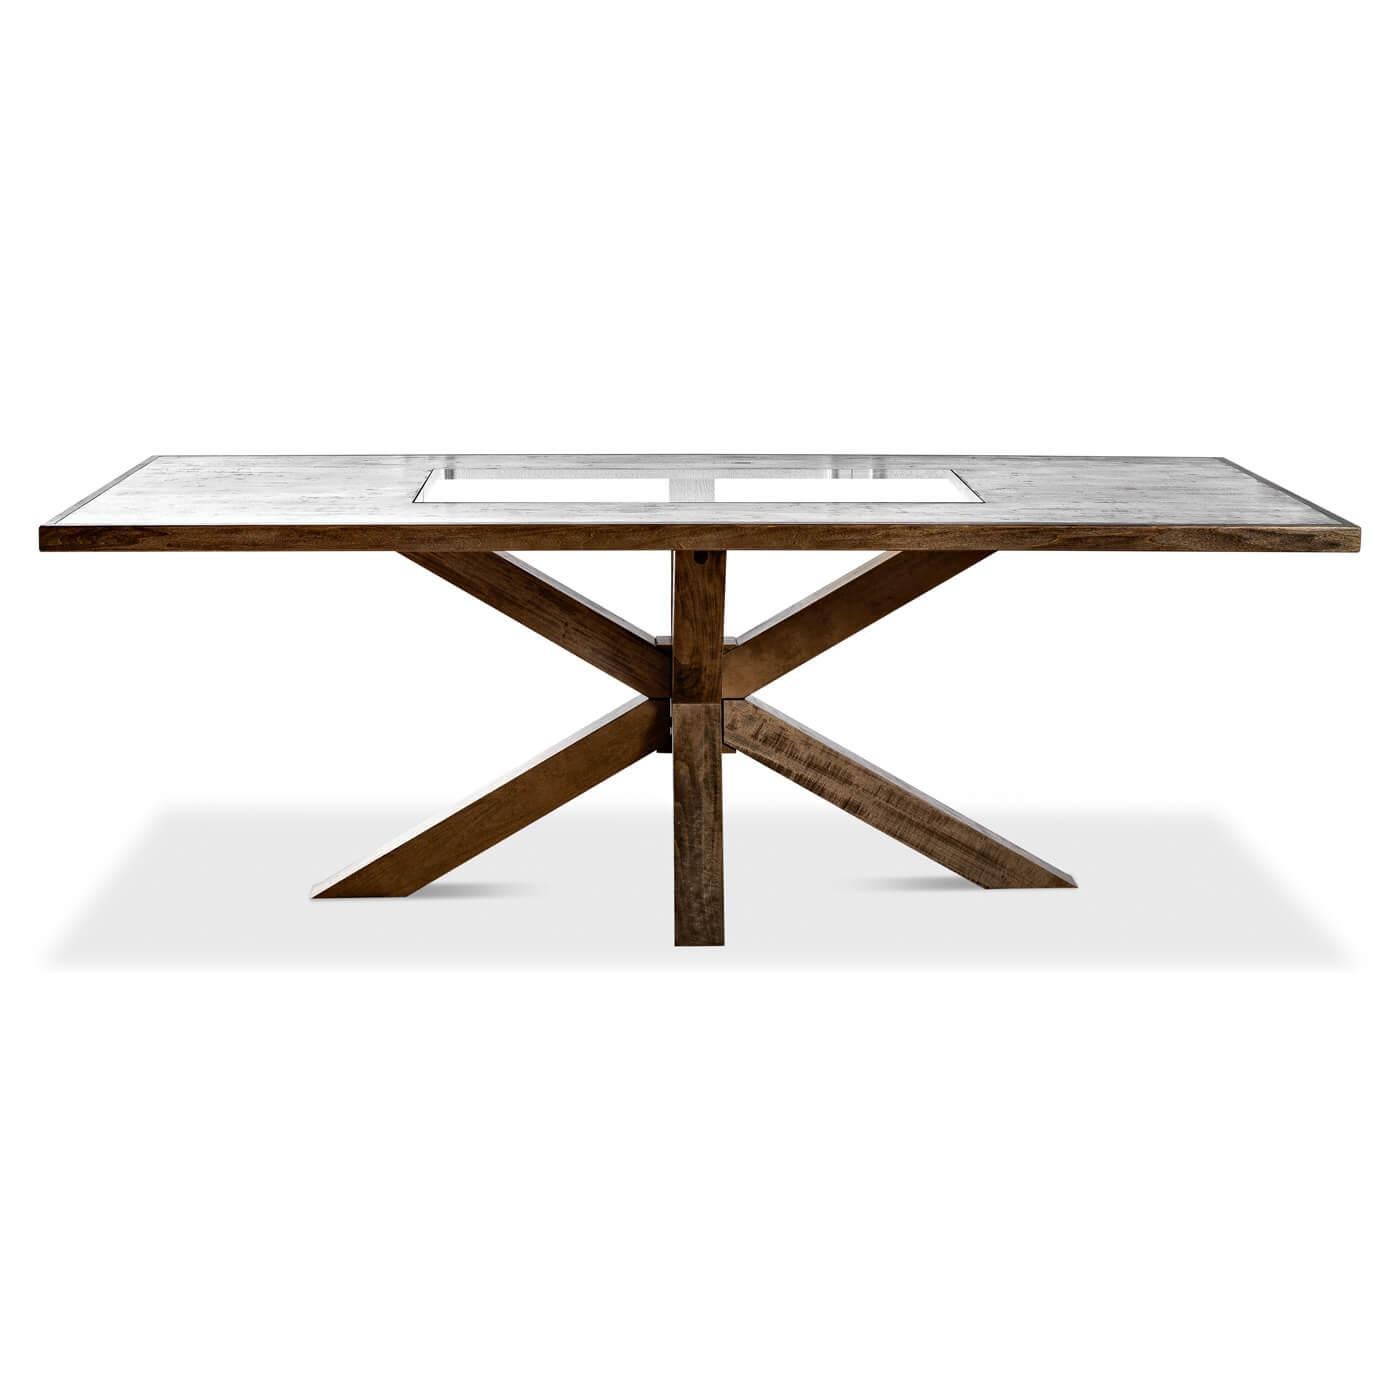 Large modern oak and glass top dining room table with a striking starlike angled base. 

Dimensions: 86